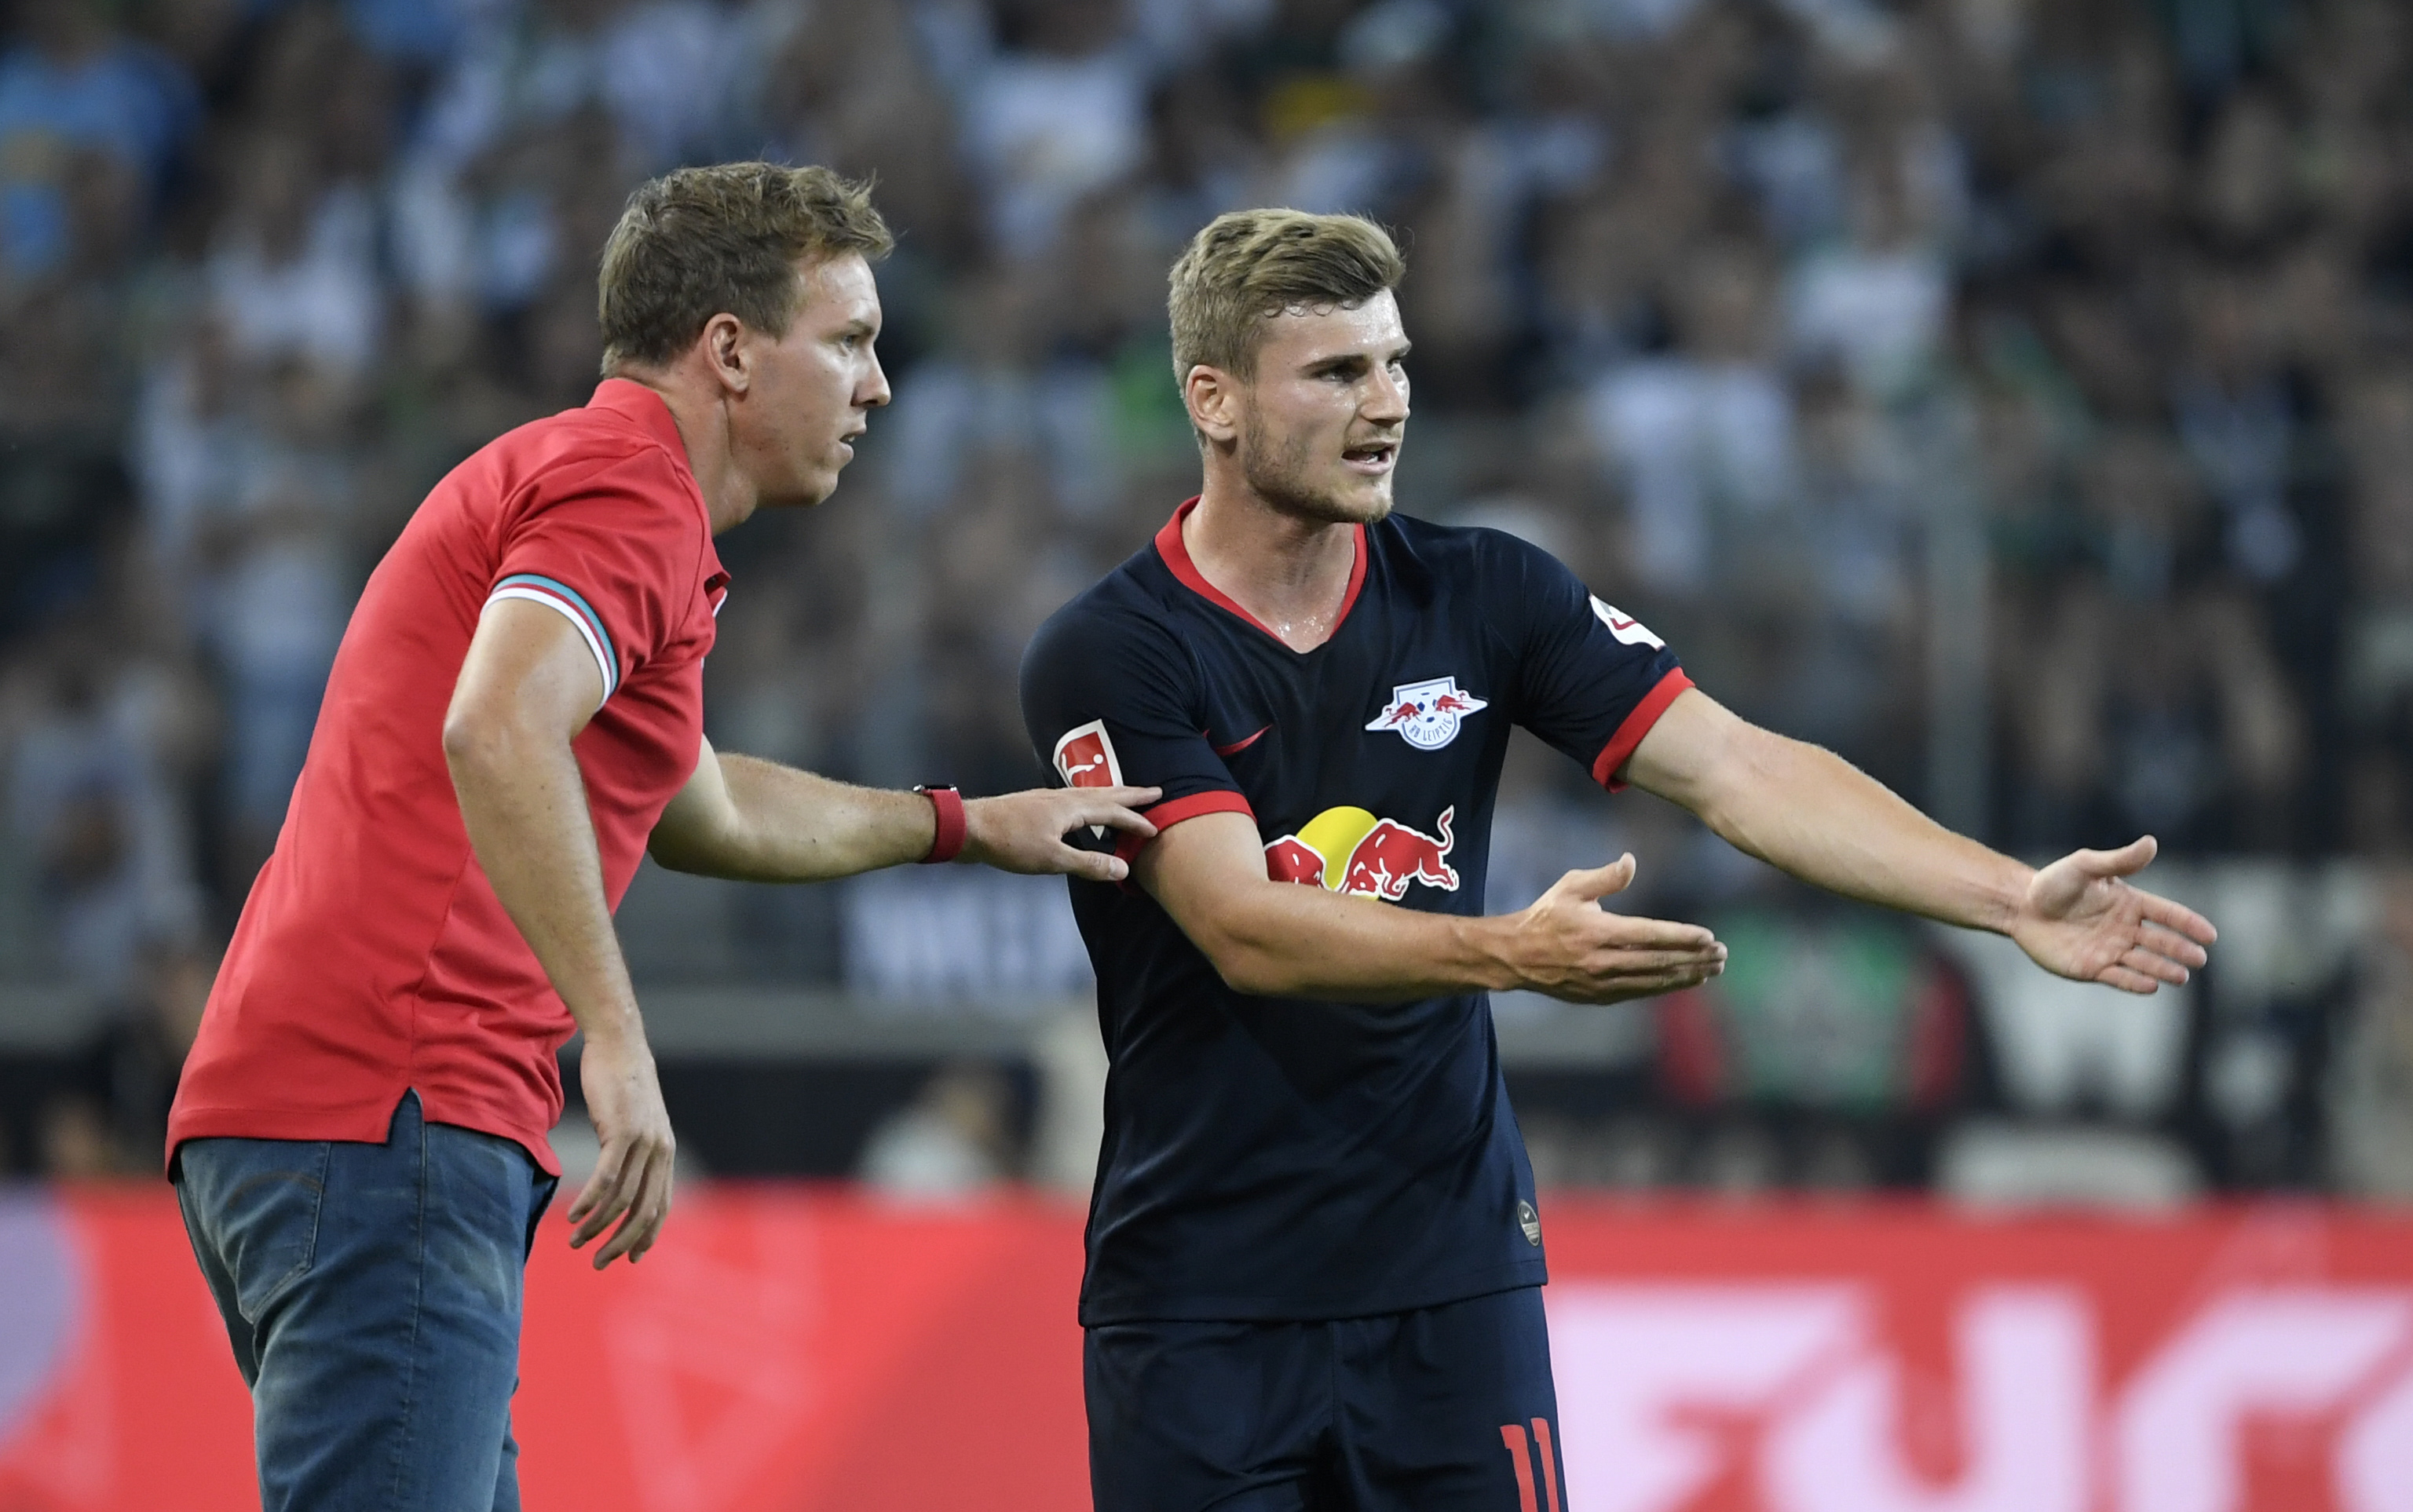 Leipzig's German headcoach Julian Nagelsmann and Leipzig's German forward Timo Werner (R) talk during the German first division Bundesliga football match Borussia Moenchengladbach v RB Leipzig in Moenchengladbach, western Germany on August 30, 2019. (Photo by Ina FASSBENDER / AFP) / RESTRICTIONS: DFL REGULATIONS PROHIBIT ANY USE OF PHOTOGRAPHS AS IMAGE SEQUENCES AND/OR QUASI-VIDEO        (Photo credit should read INA FASSBENDER/AFP/Getty Images)